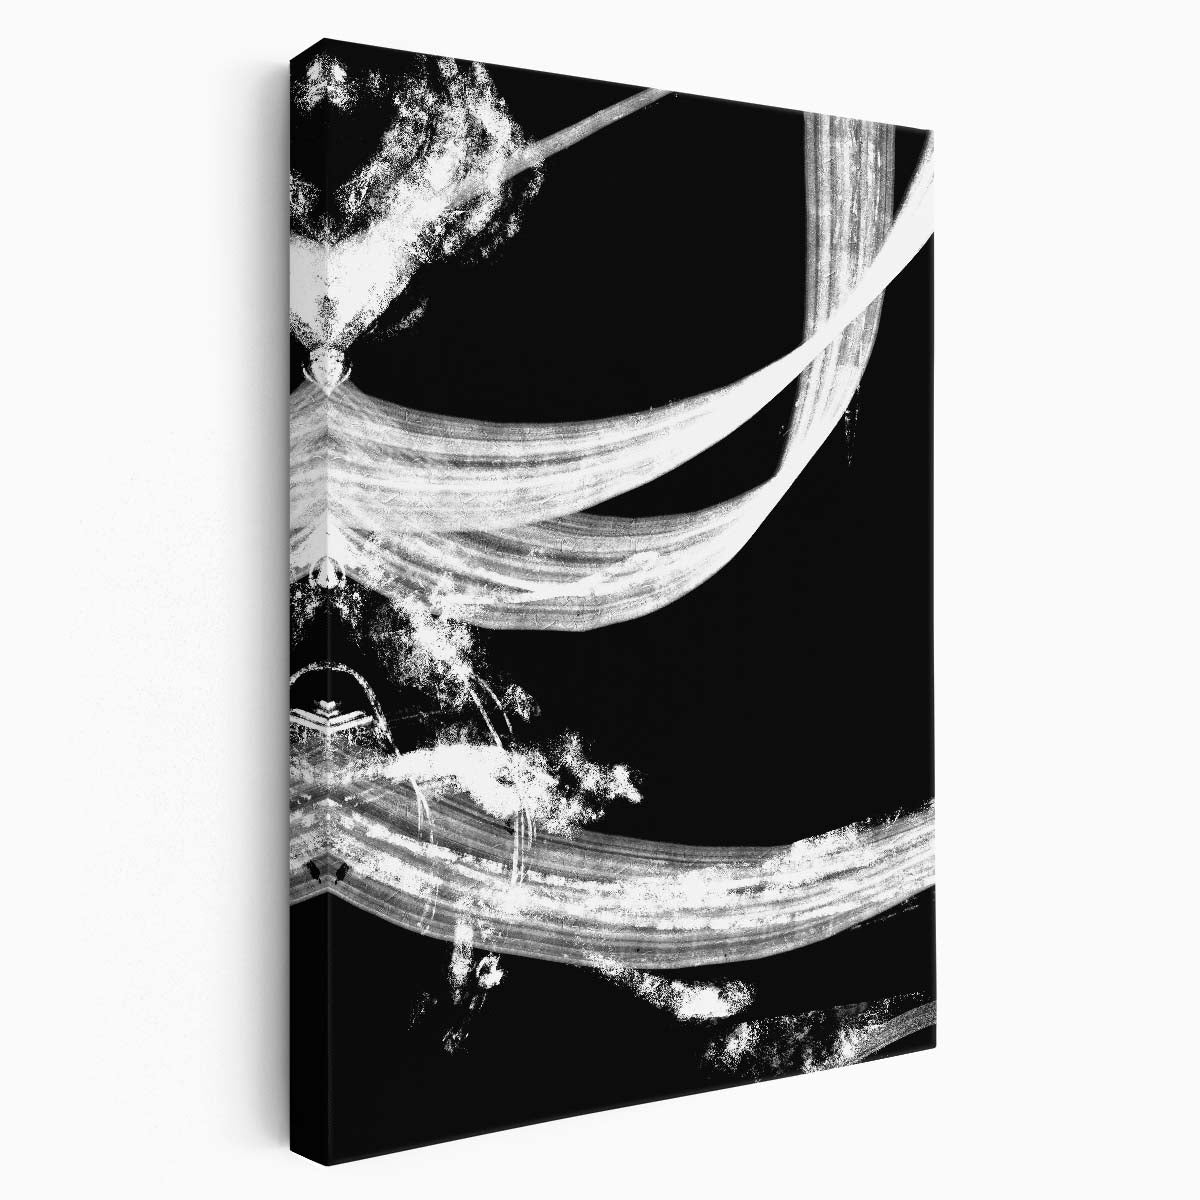 Monochrome Abstract Geometric Illustration Tapestry - Painterly Black and White by Luxuriance Designs, made in USA